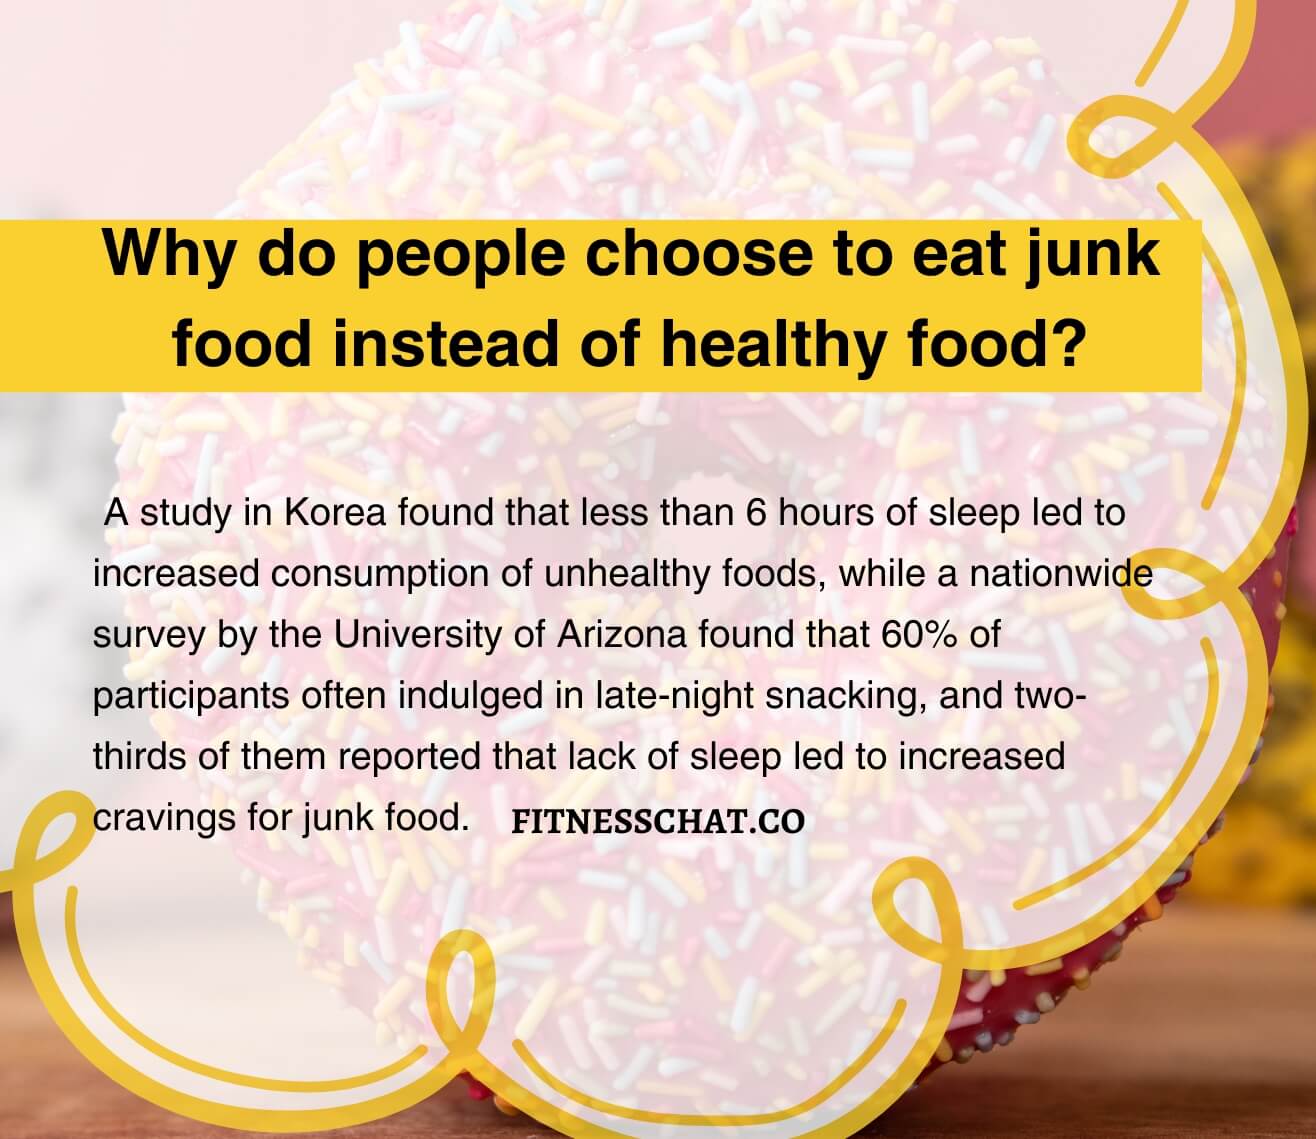 Why do people choose to eat junk food instead of healthy food